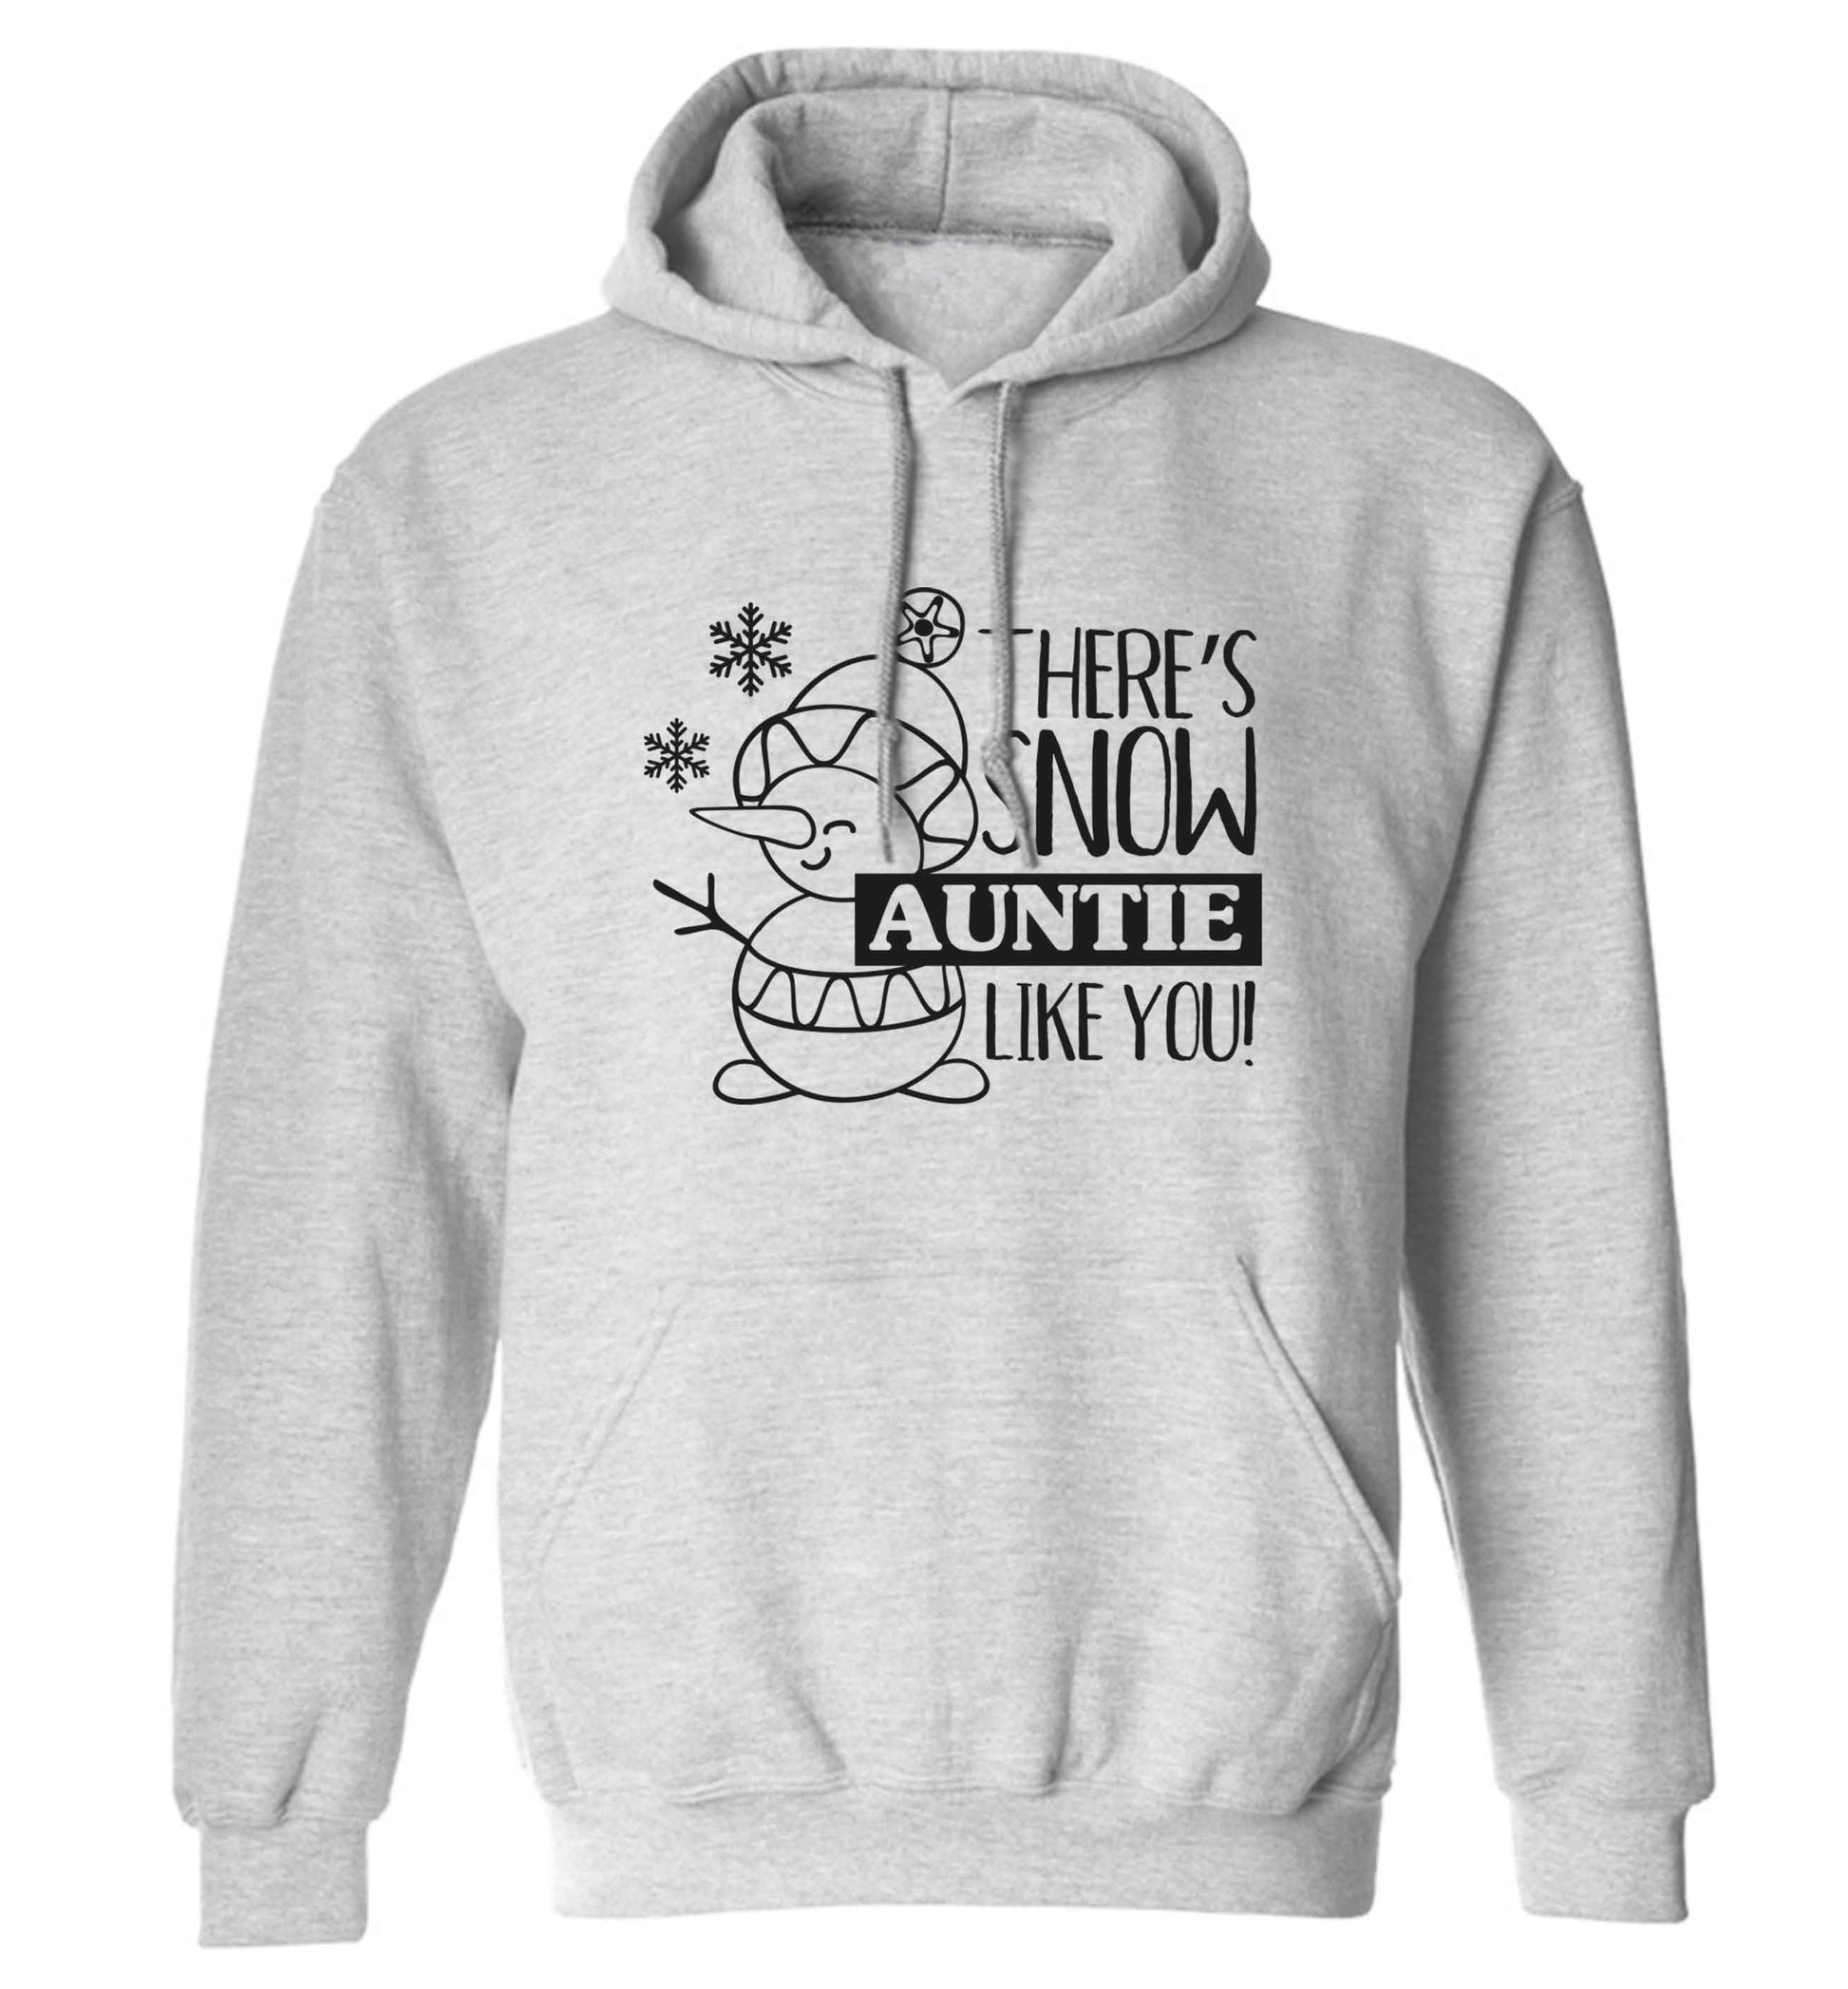 There's snow auntie like you adults unisex grey hoodie 2XL